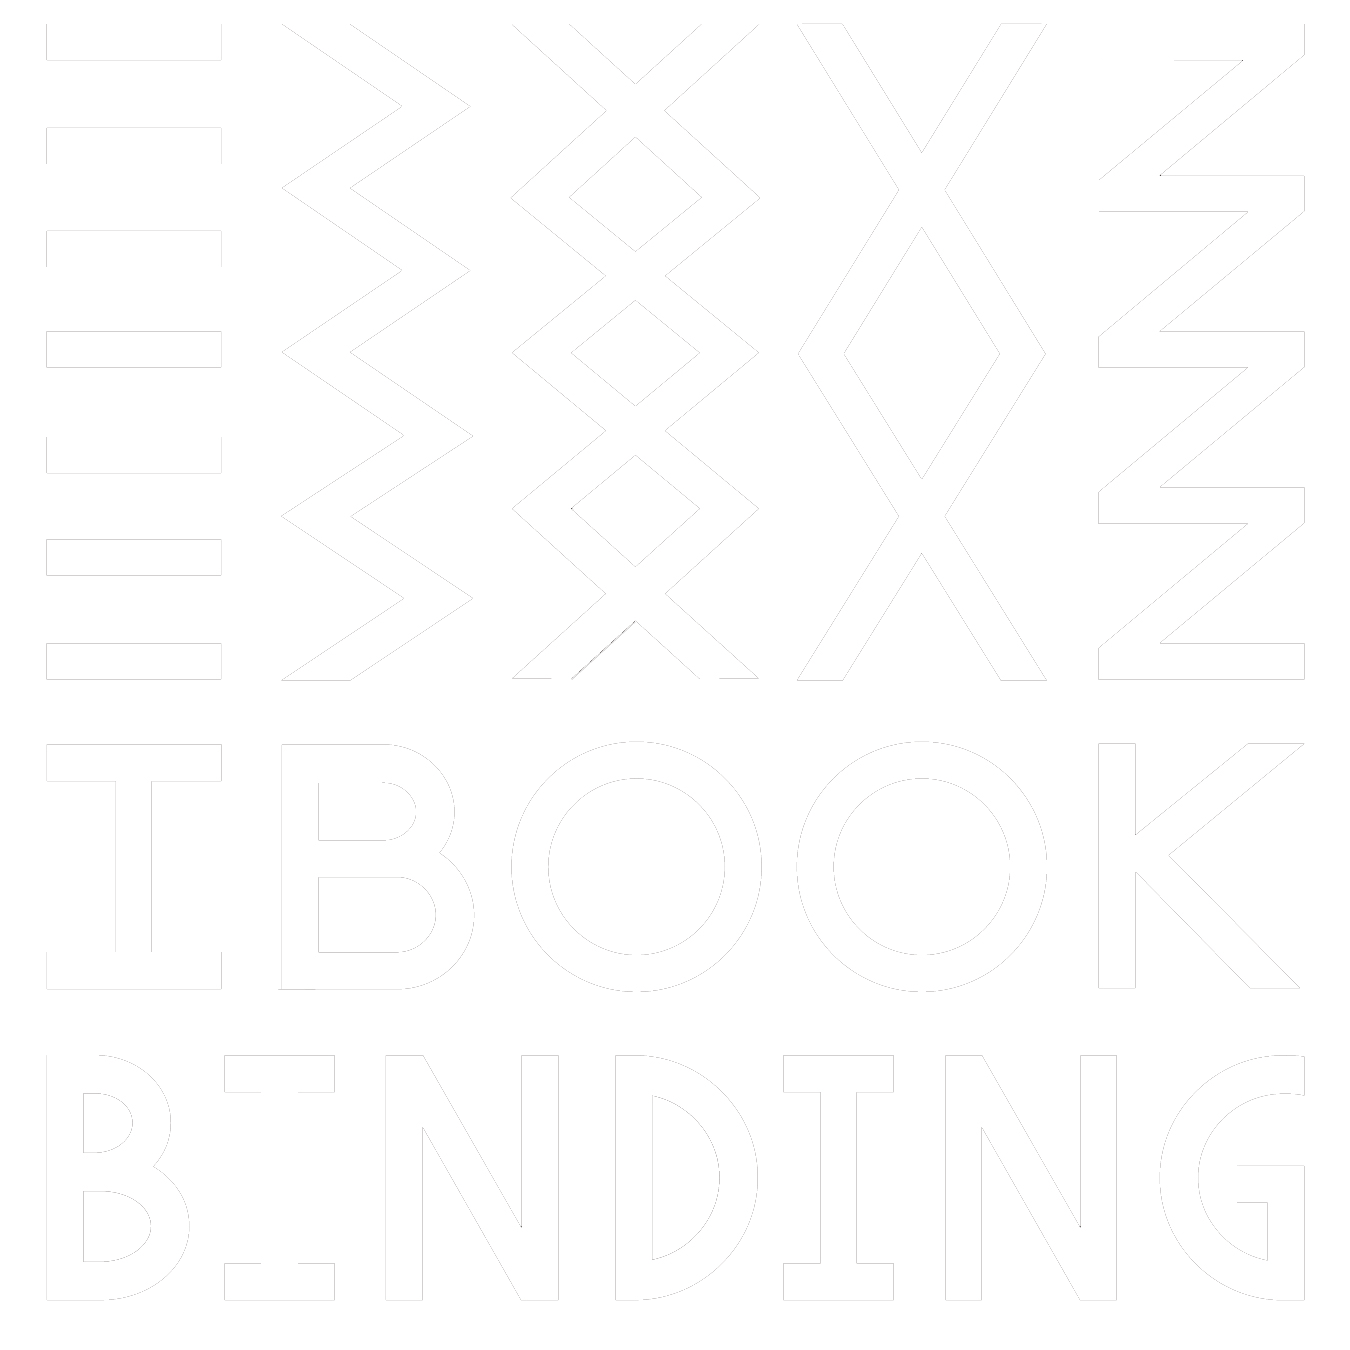 Introduction to Bookbinding Supplies and Materials - iBookBinding -  Bookbinding Tutorials & Resources